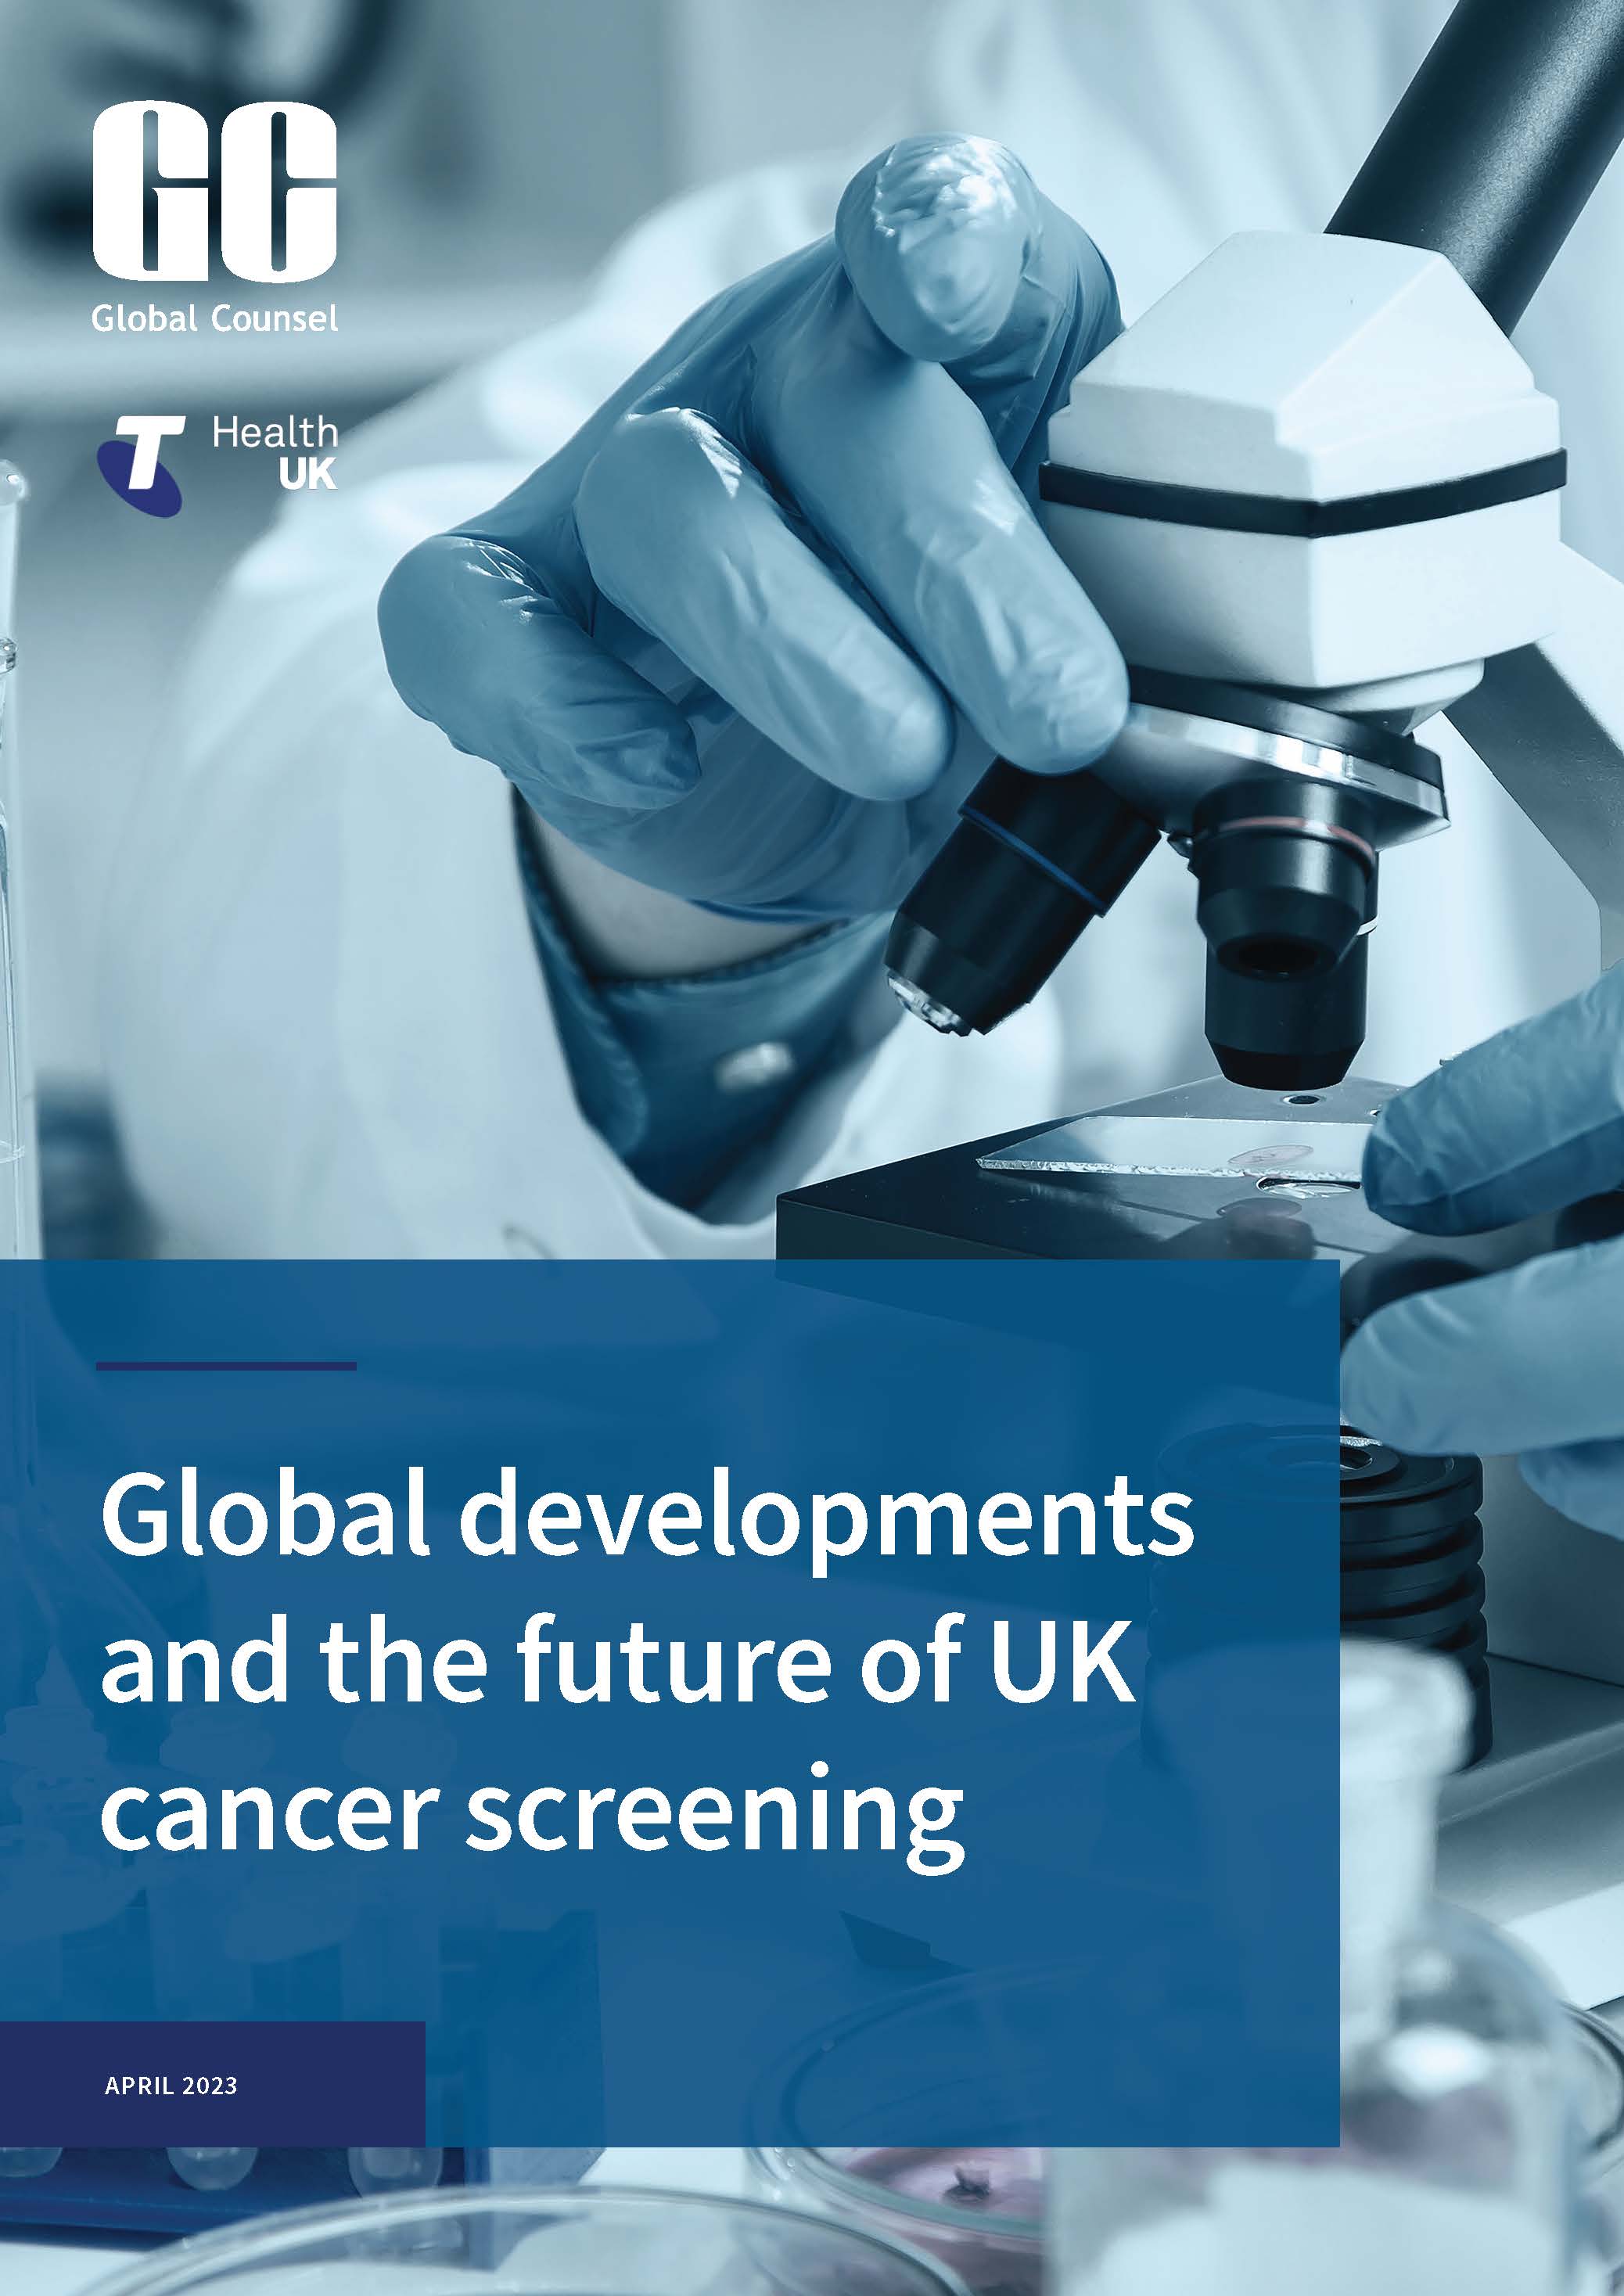 Global developments and the future of UK cancer screening